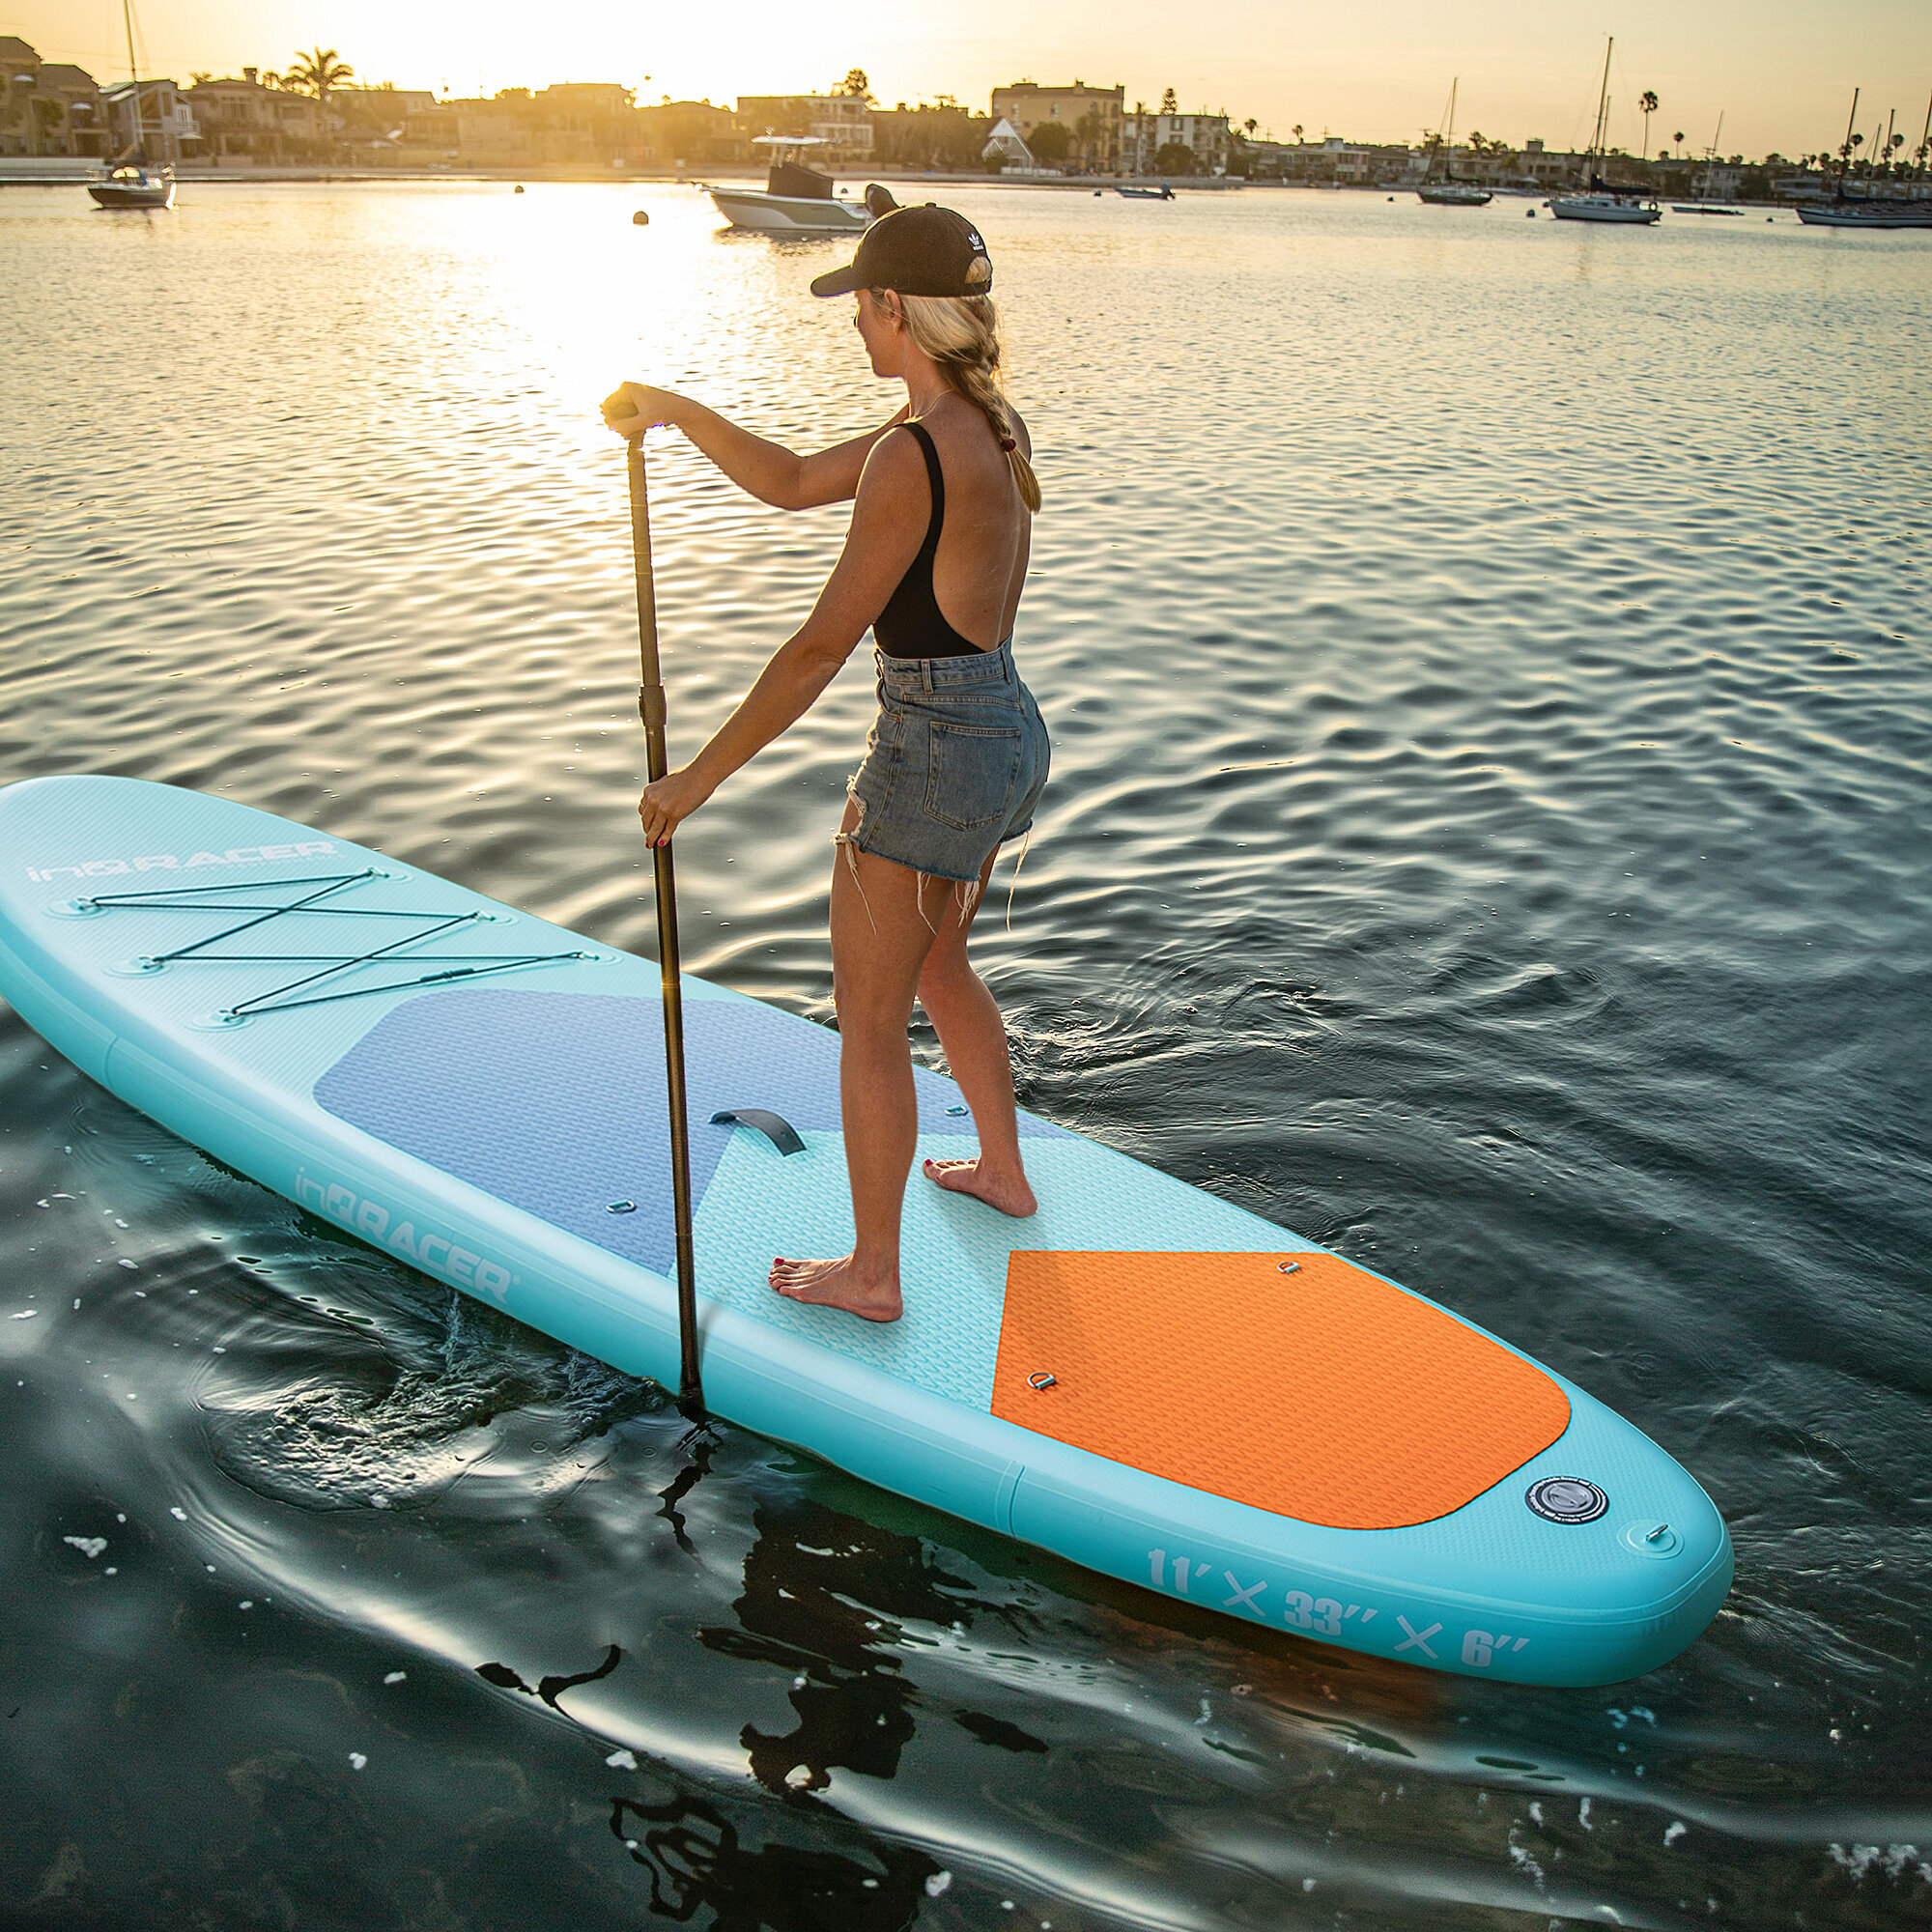 EDGEWOOD Inflatable Stand Up Paddle Board, 10'6/11'SUP Surfboard